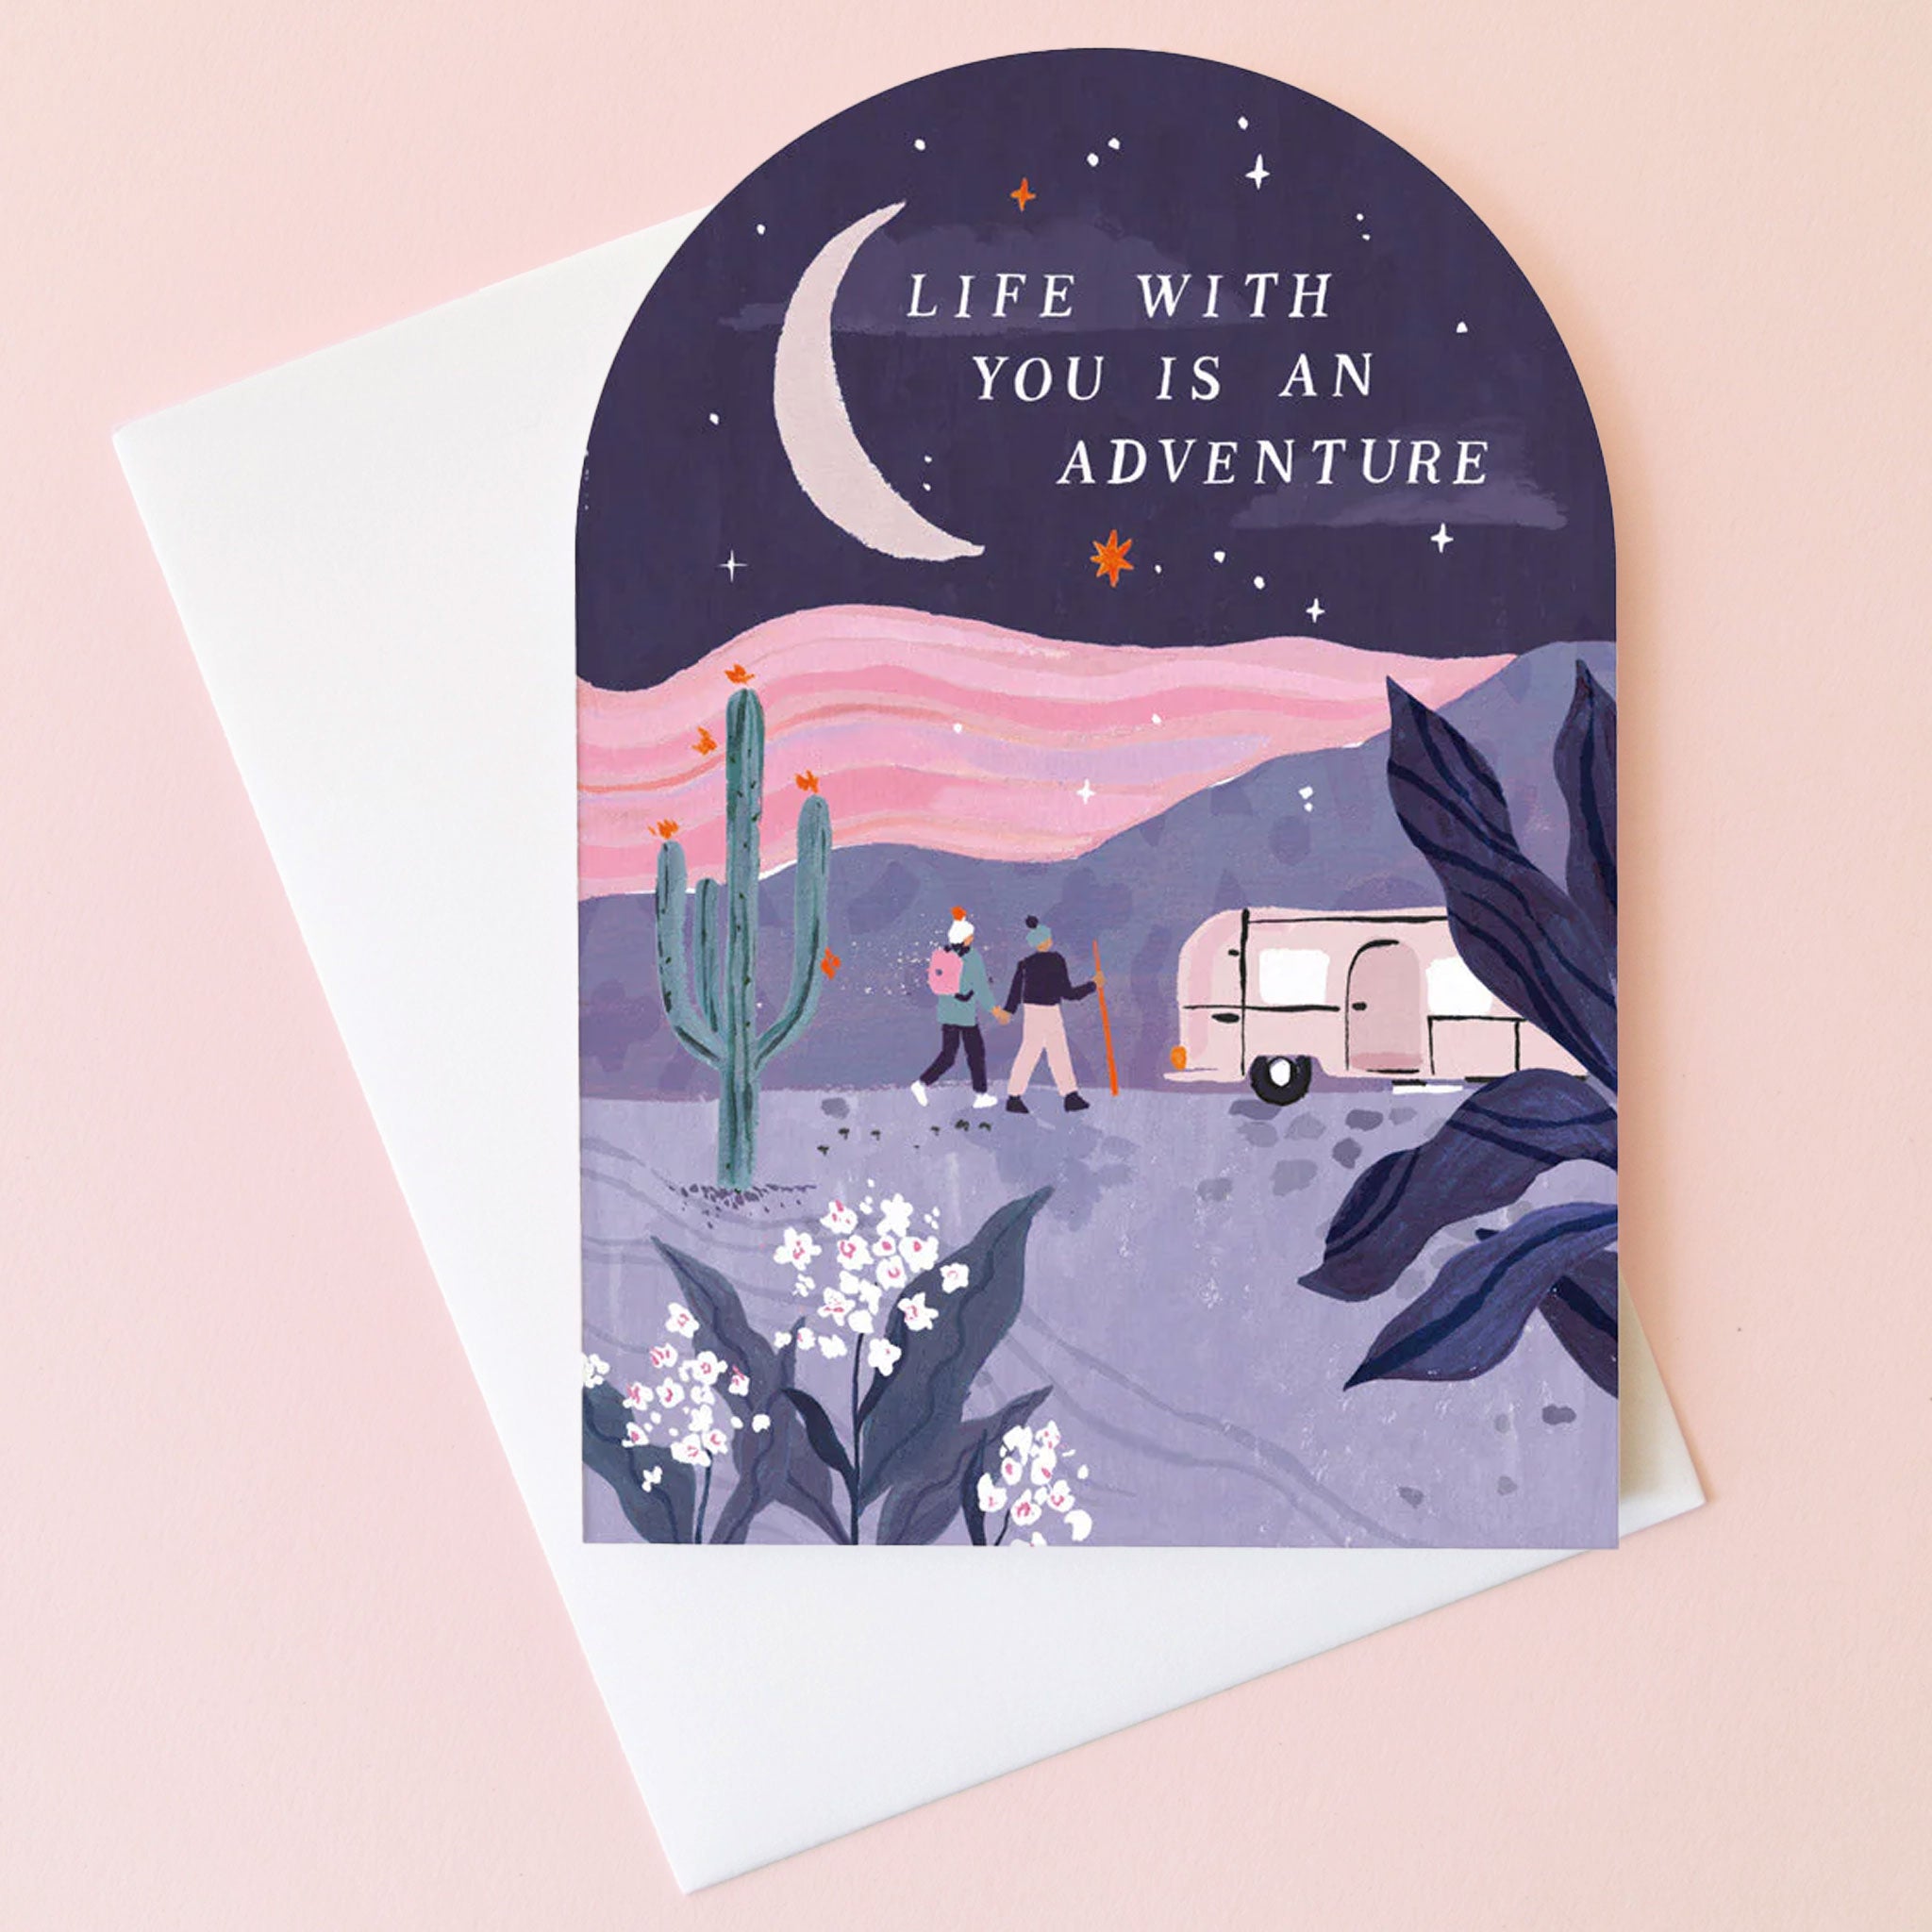 On a tan background is an arched card with a desert scape and text at the top that reads, "Life With You Is An Adventure". 